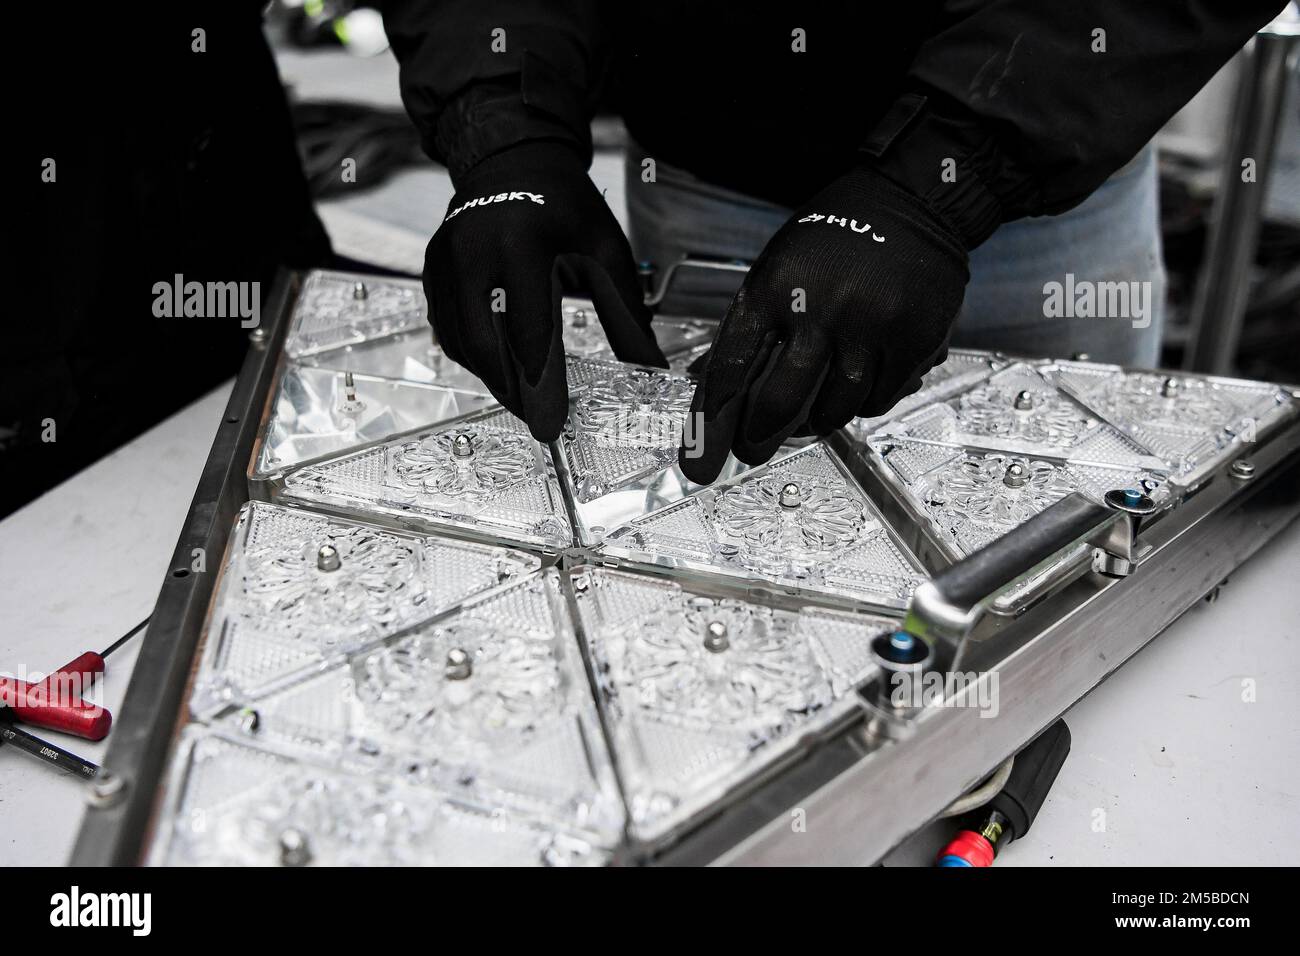 (221227) -- NEW YORK, Dec. 27, 2022 (Xinhua) -- A piece of crystal is put into a larger pattern during the Crystal Times Square New Year's Ball assembly on the roof of One Times Square, New York, the United States, on Dec. 27, 2022. As part of the yearly tradition, replacement of some of the 2,688 Waterford Crystal triangles on the Times Square New Year's Eve Ball started on Tuesday. The ball, 12 feet in diameter and 11,875 pounds in weight, will begin its descent at 11:59 p.m., Dec. 31, starting the countdown of the final seconds of the year and celebrating the beginning of a new year, at the Stock Photo